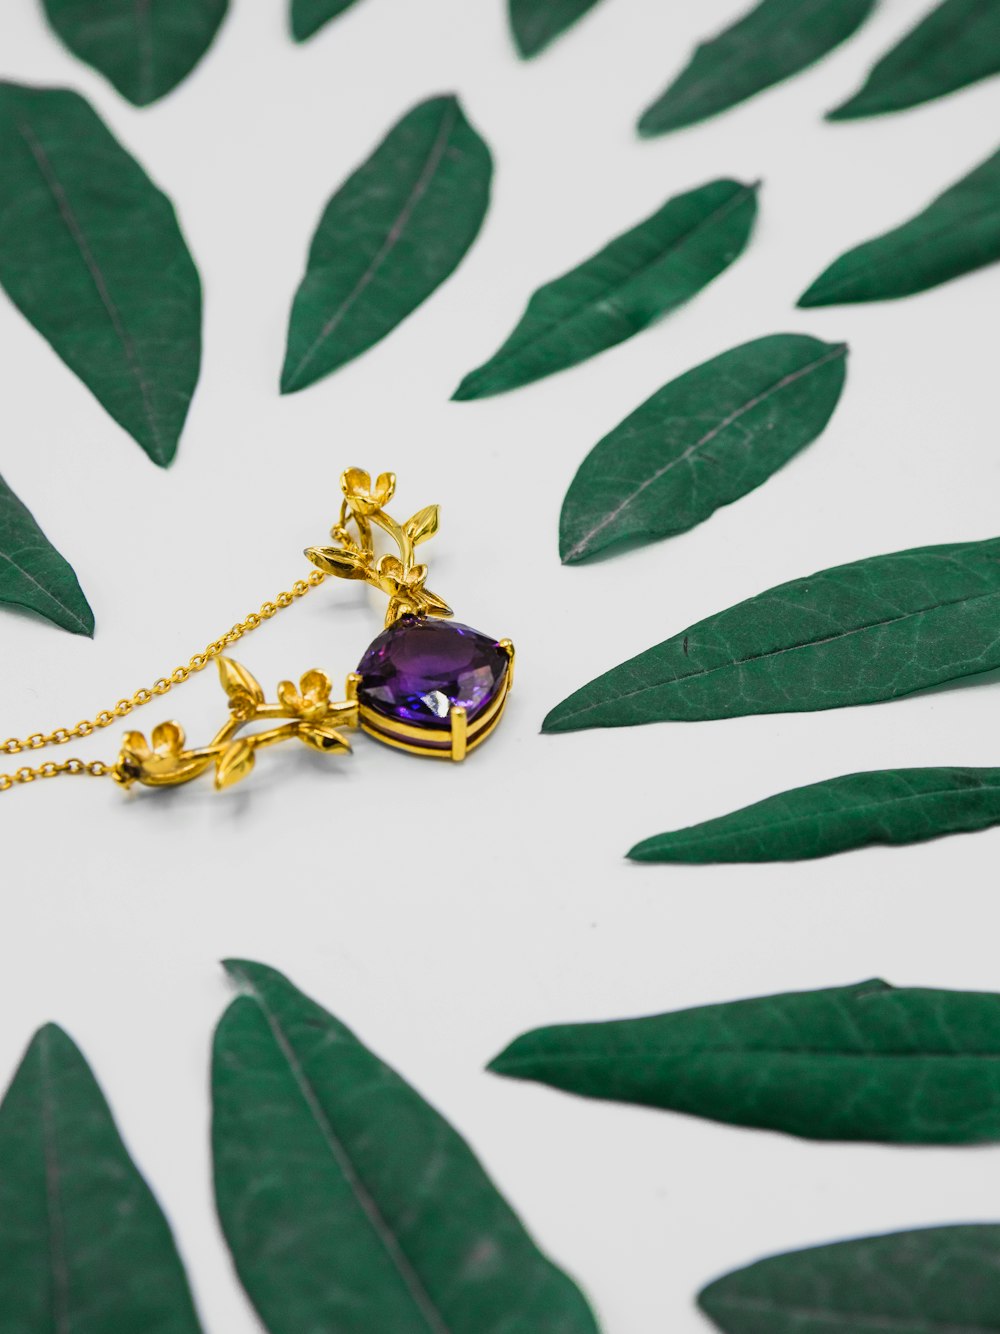 gold-colored pendant with purple stone besides green leaves